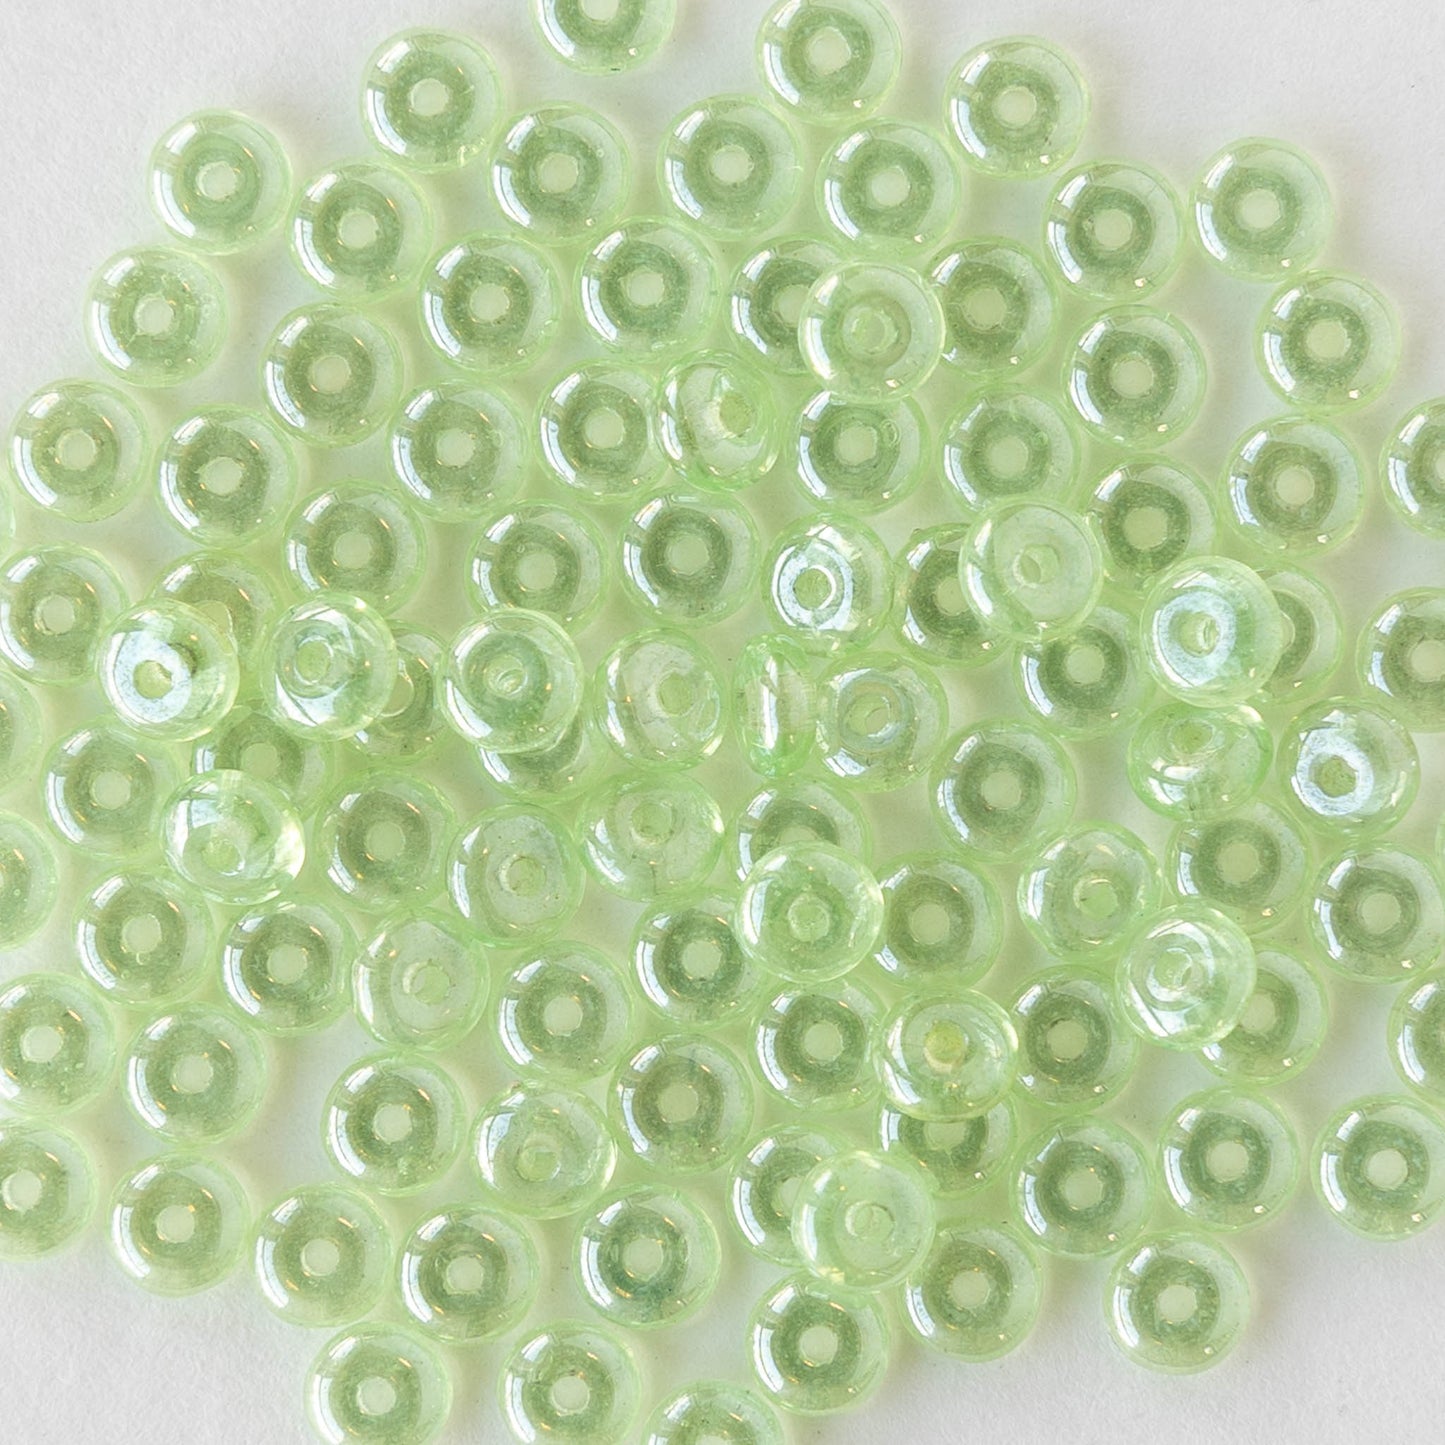 4mm Rondelle Beads - Peridot Green Luster - 100 Beads